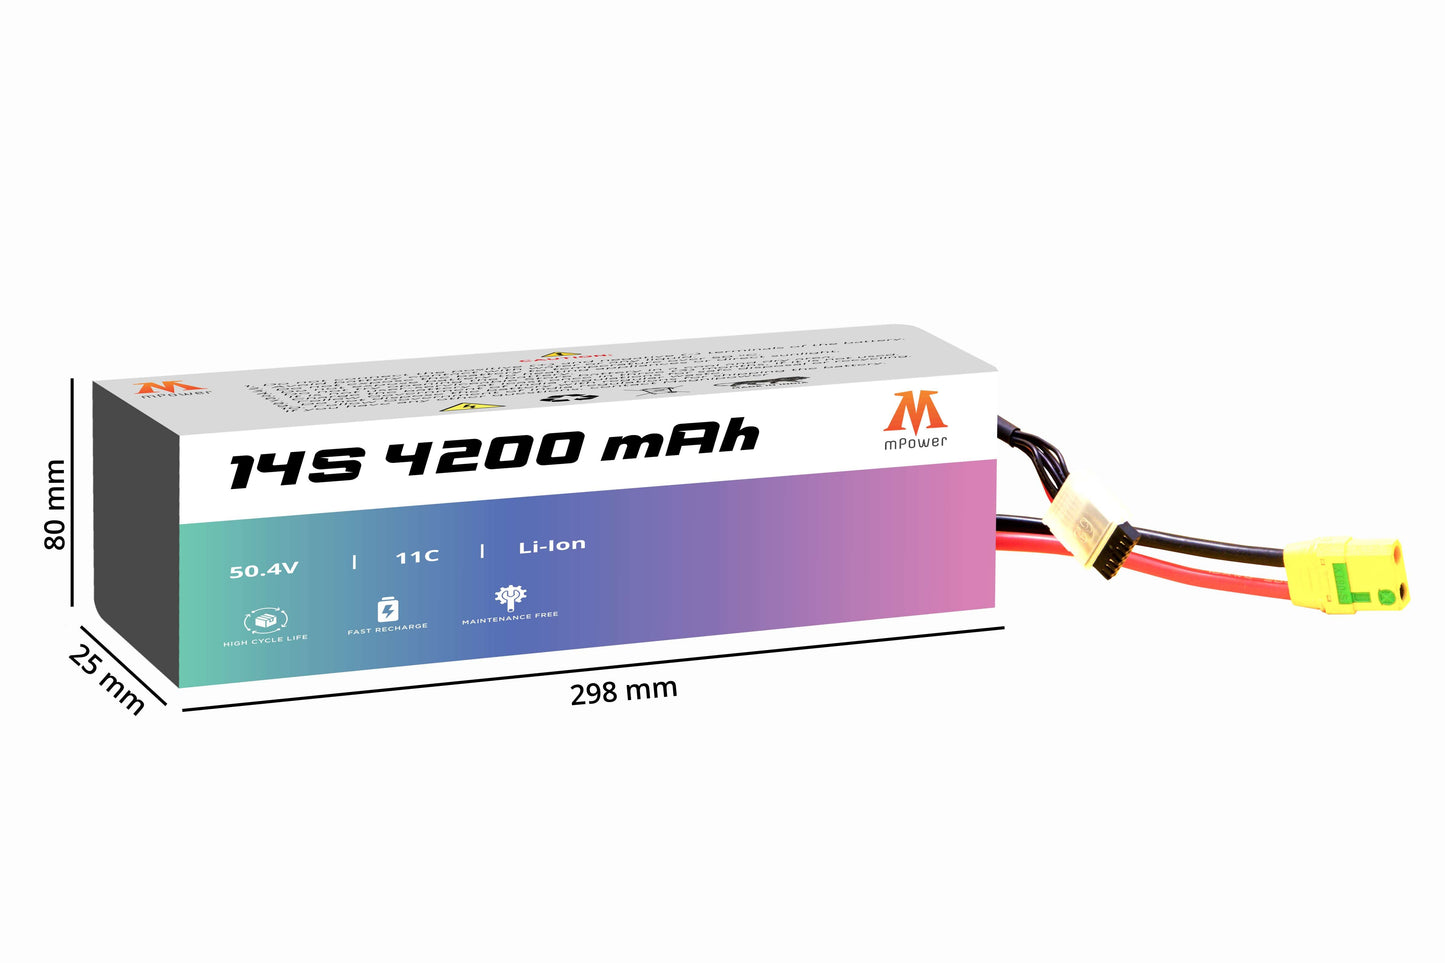 mPower 14S 4200mAh Lithium-Ion Battery for surveillance Drones